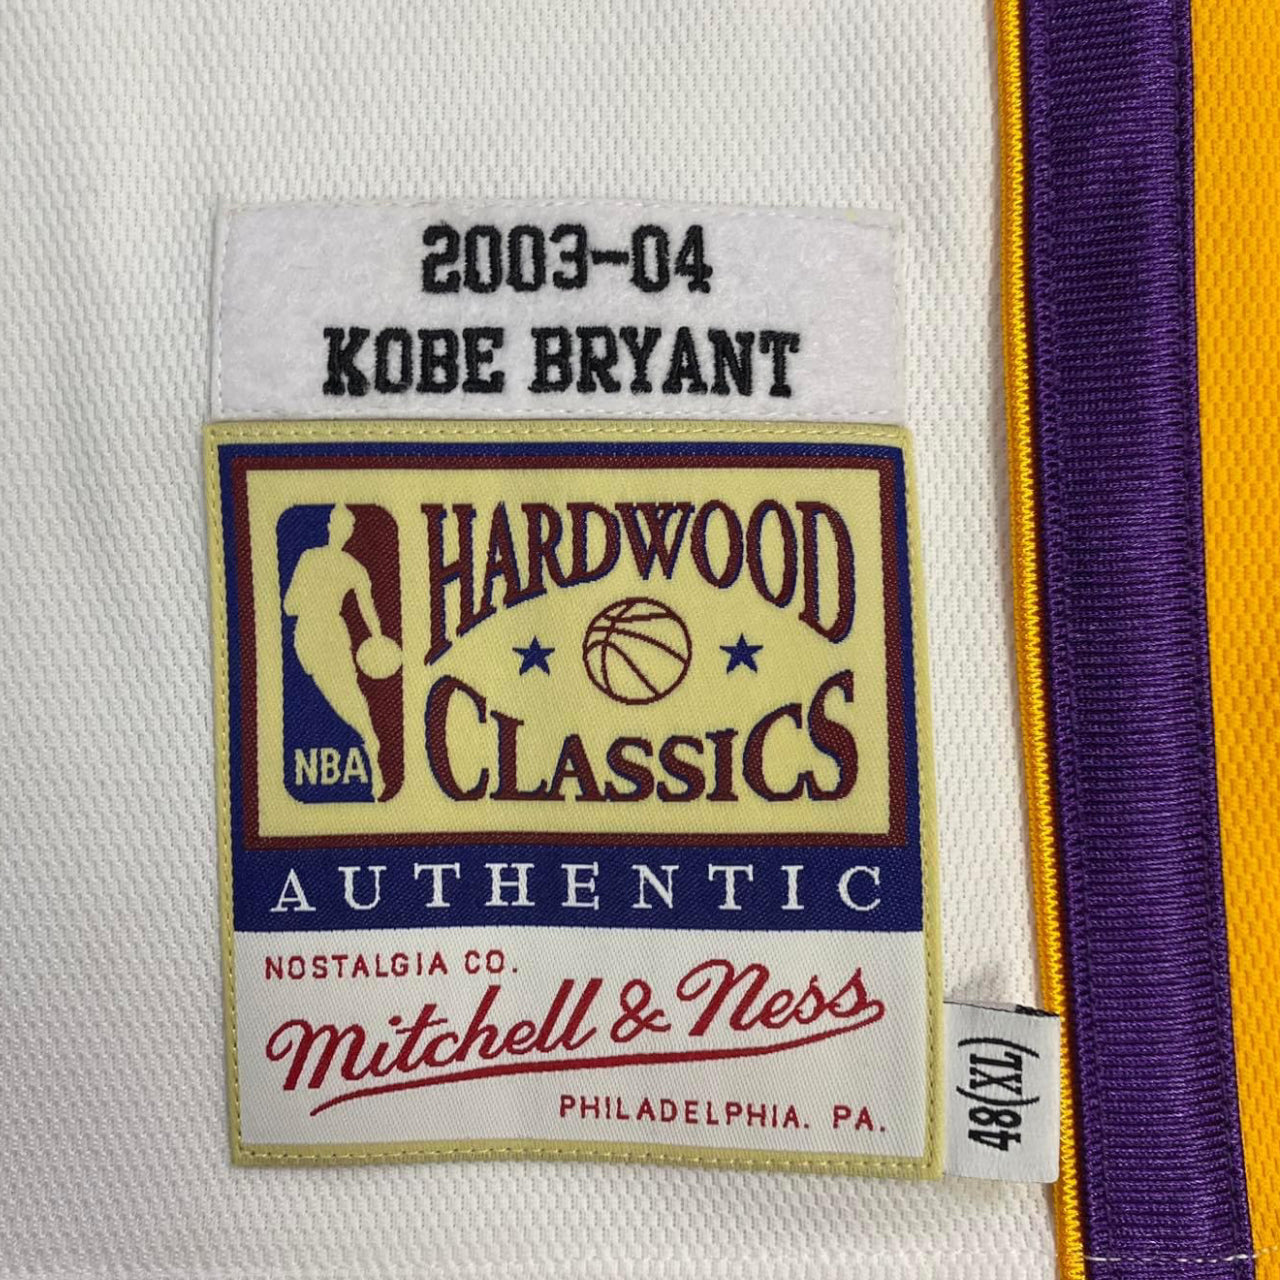 Mitchell and Ness Kobe Bryant Los Angeles Lakers 2003-2004 Alternate Authentic Jersey - White #8 - Hoop Jersey Store